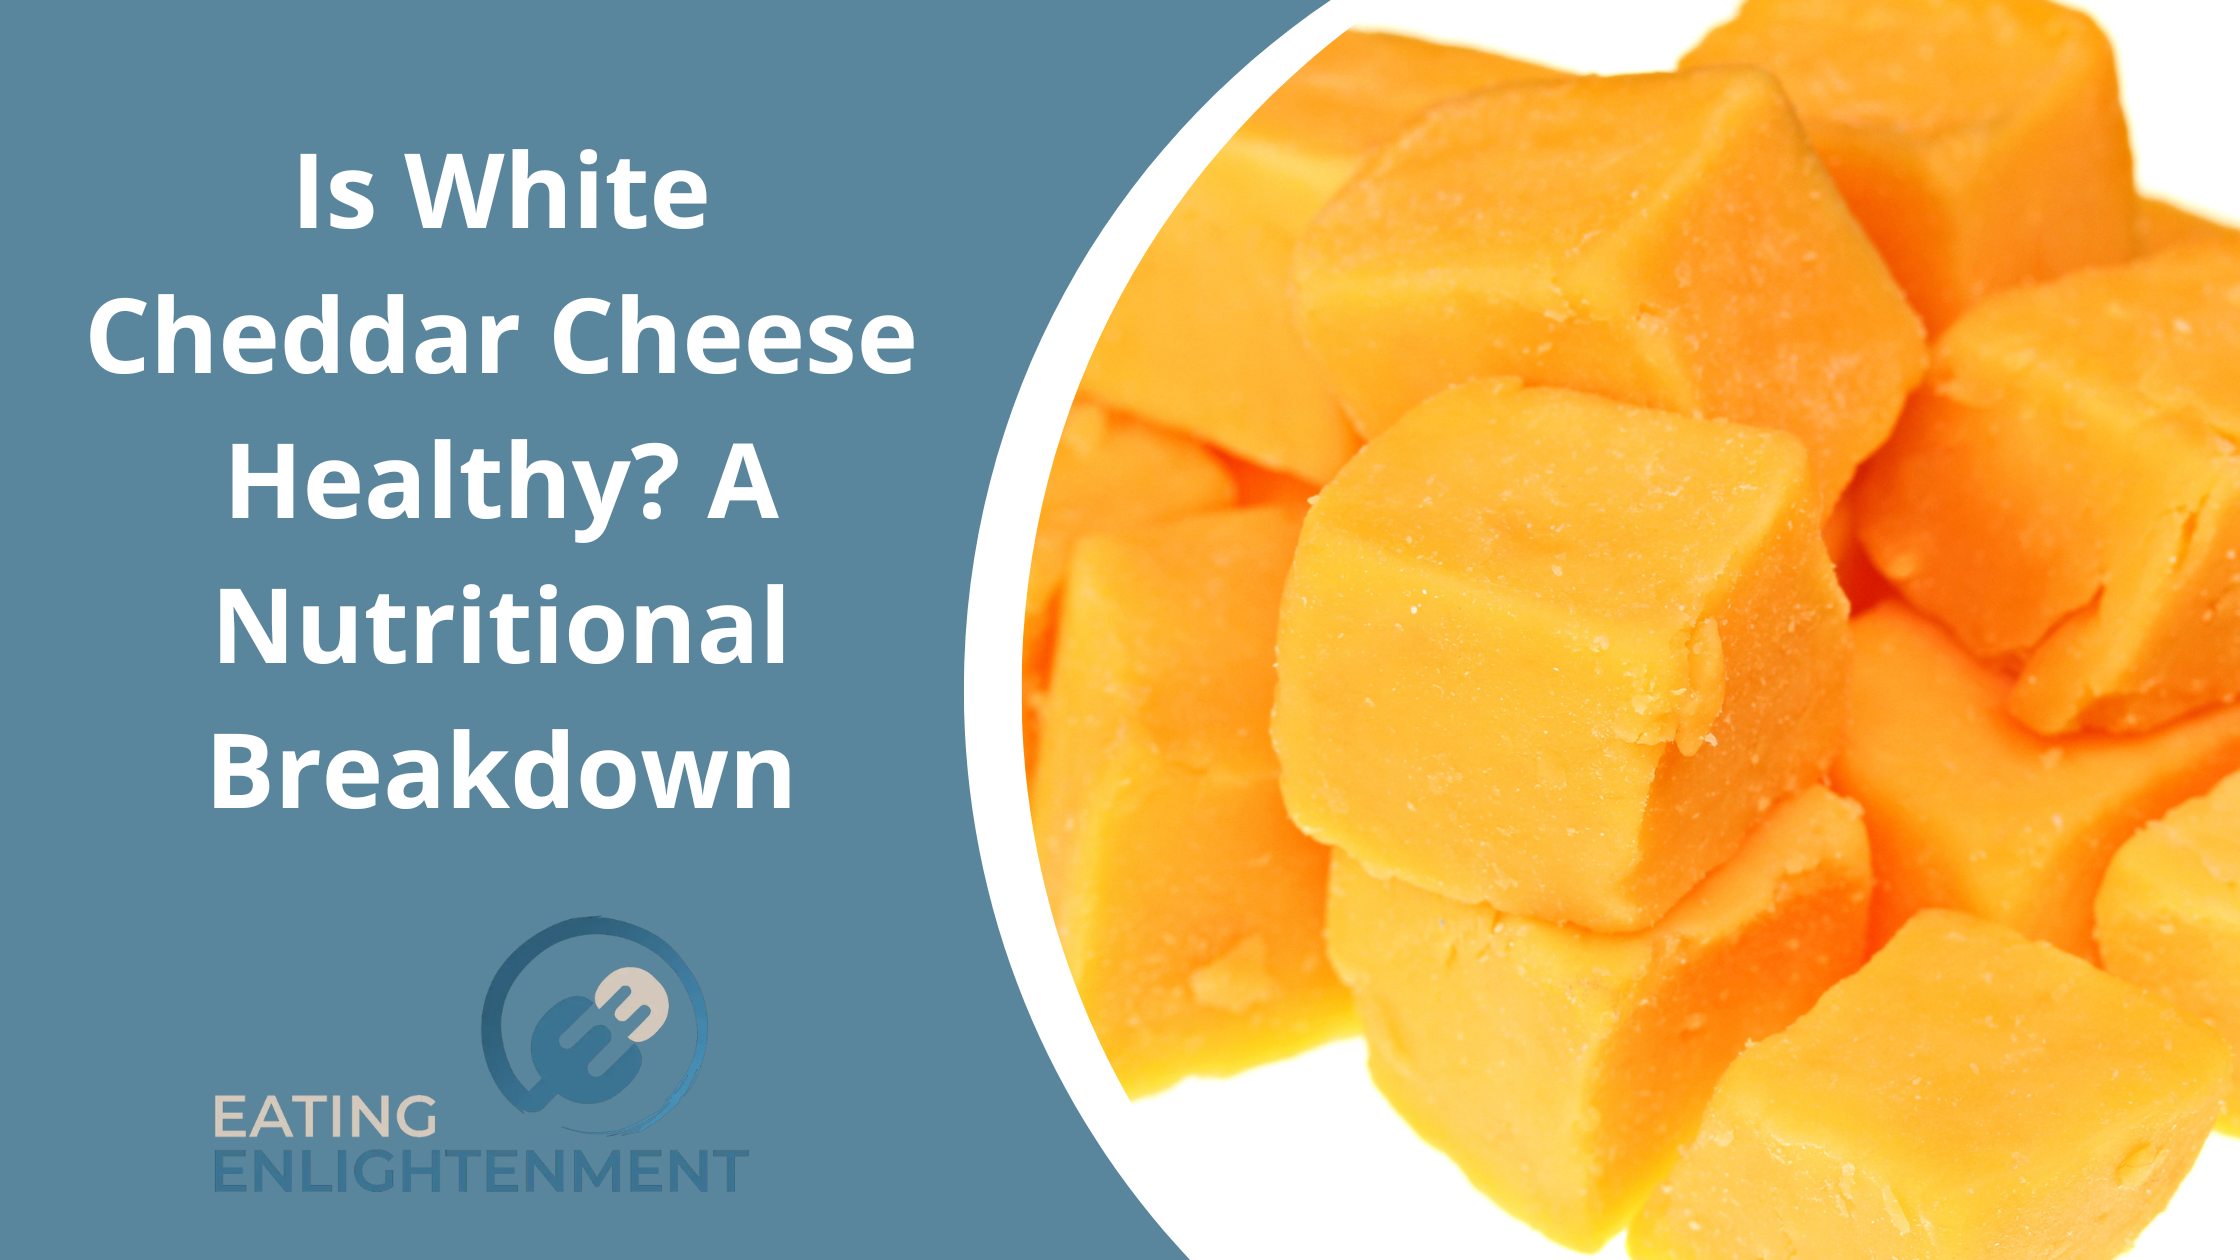 Is White Cheddar Cheese Healthy? A Nutritional Breakdown